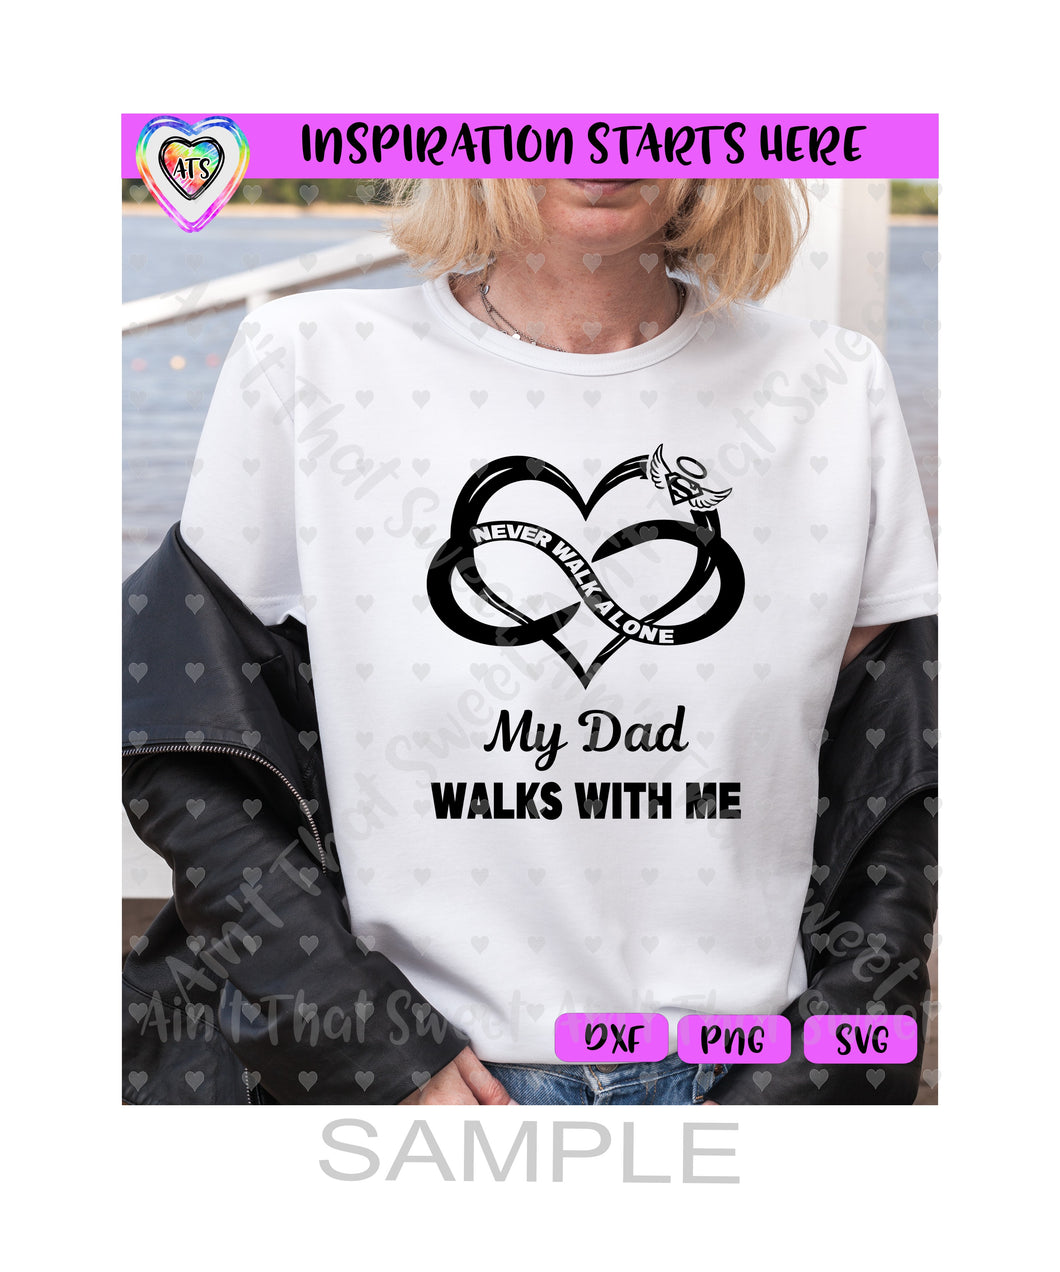 Never Walk Alone | My Dad Walks Walks With Me | Super S (Great For An Auto Decal) - Transparent PNG, SVG, DXF  - Silhouette, Cricut, Scan N Cut